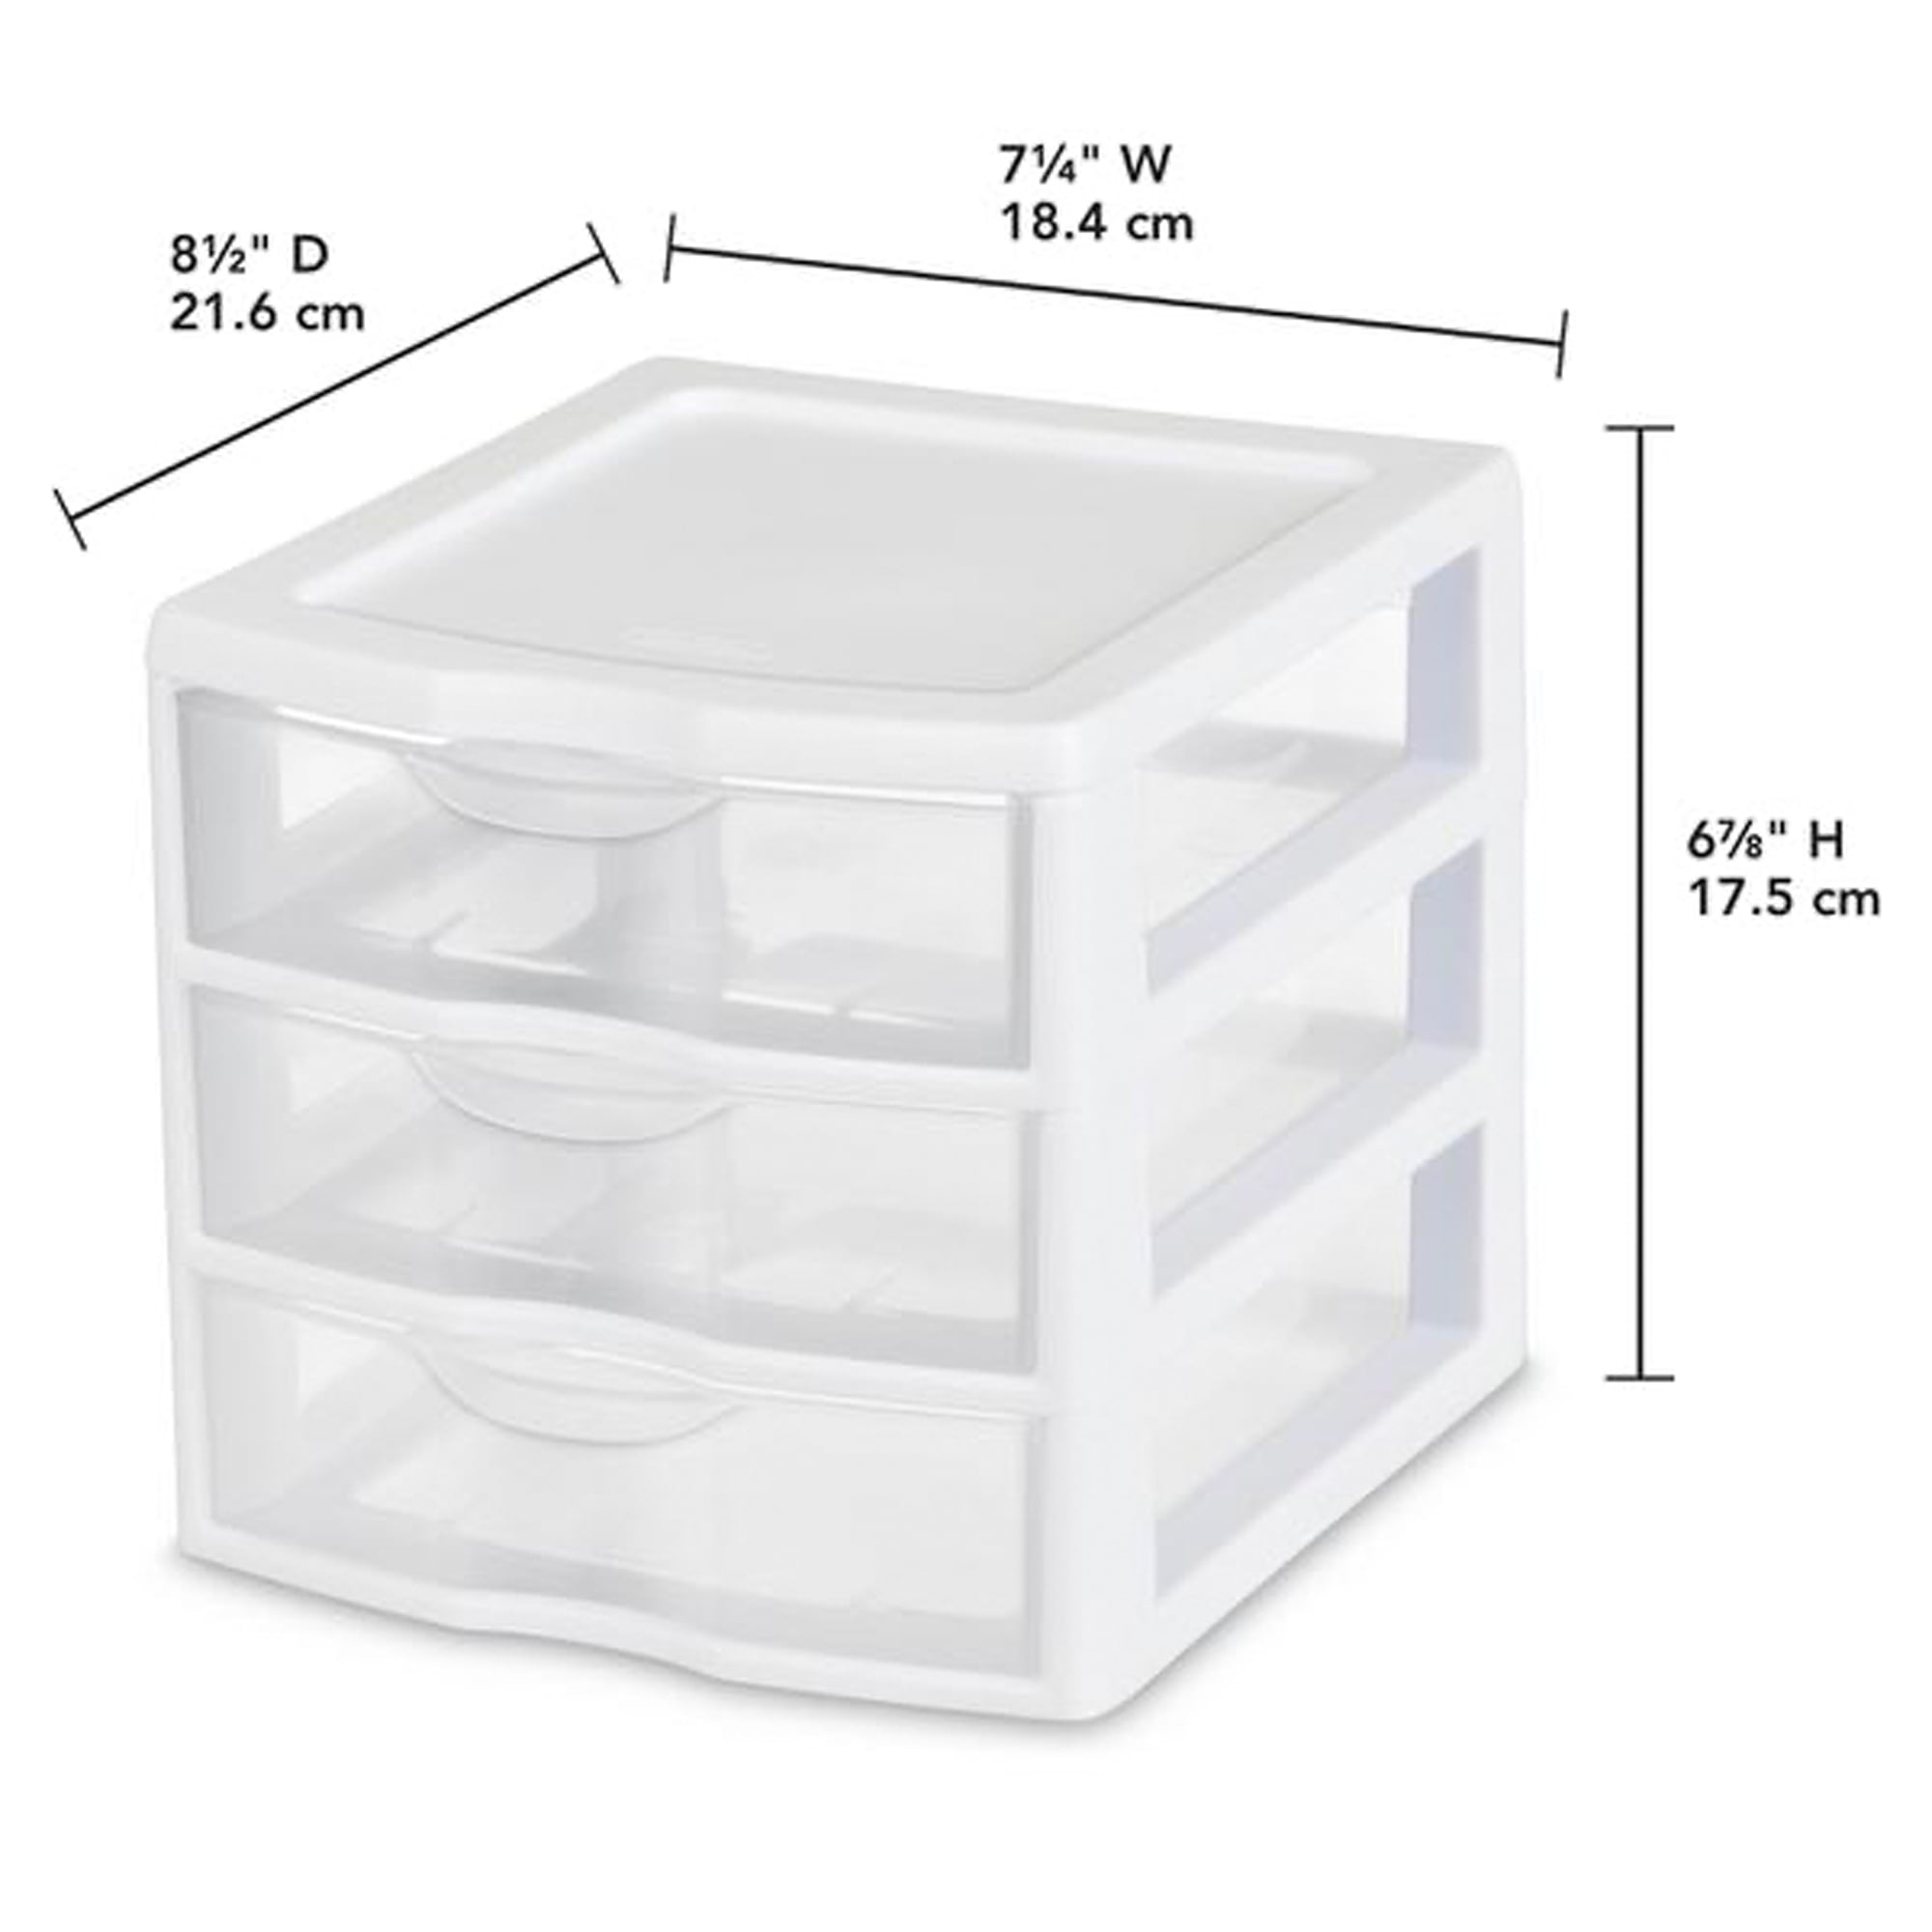 Quantum 6 1/4 x 15 x 18 3/4 Plastic Drawer Cabinet with 30 Clear Compact  Drawers and 9 Bins PDC-930BK